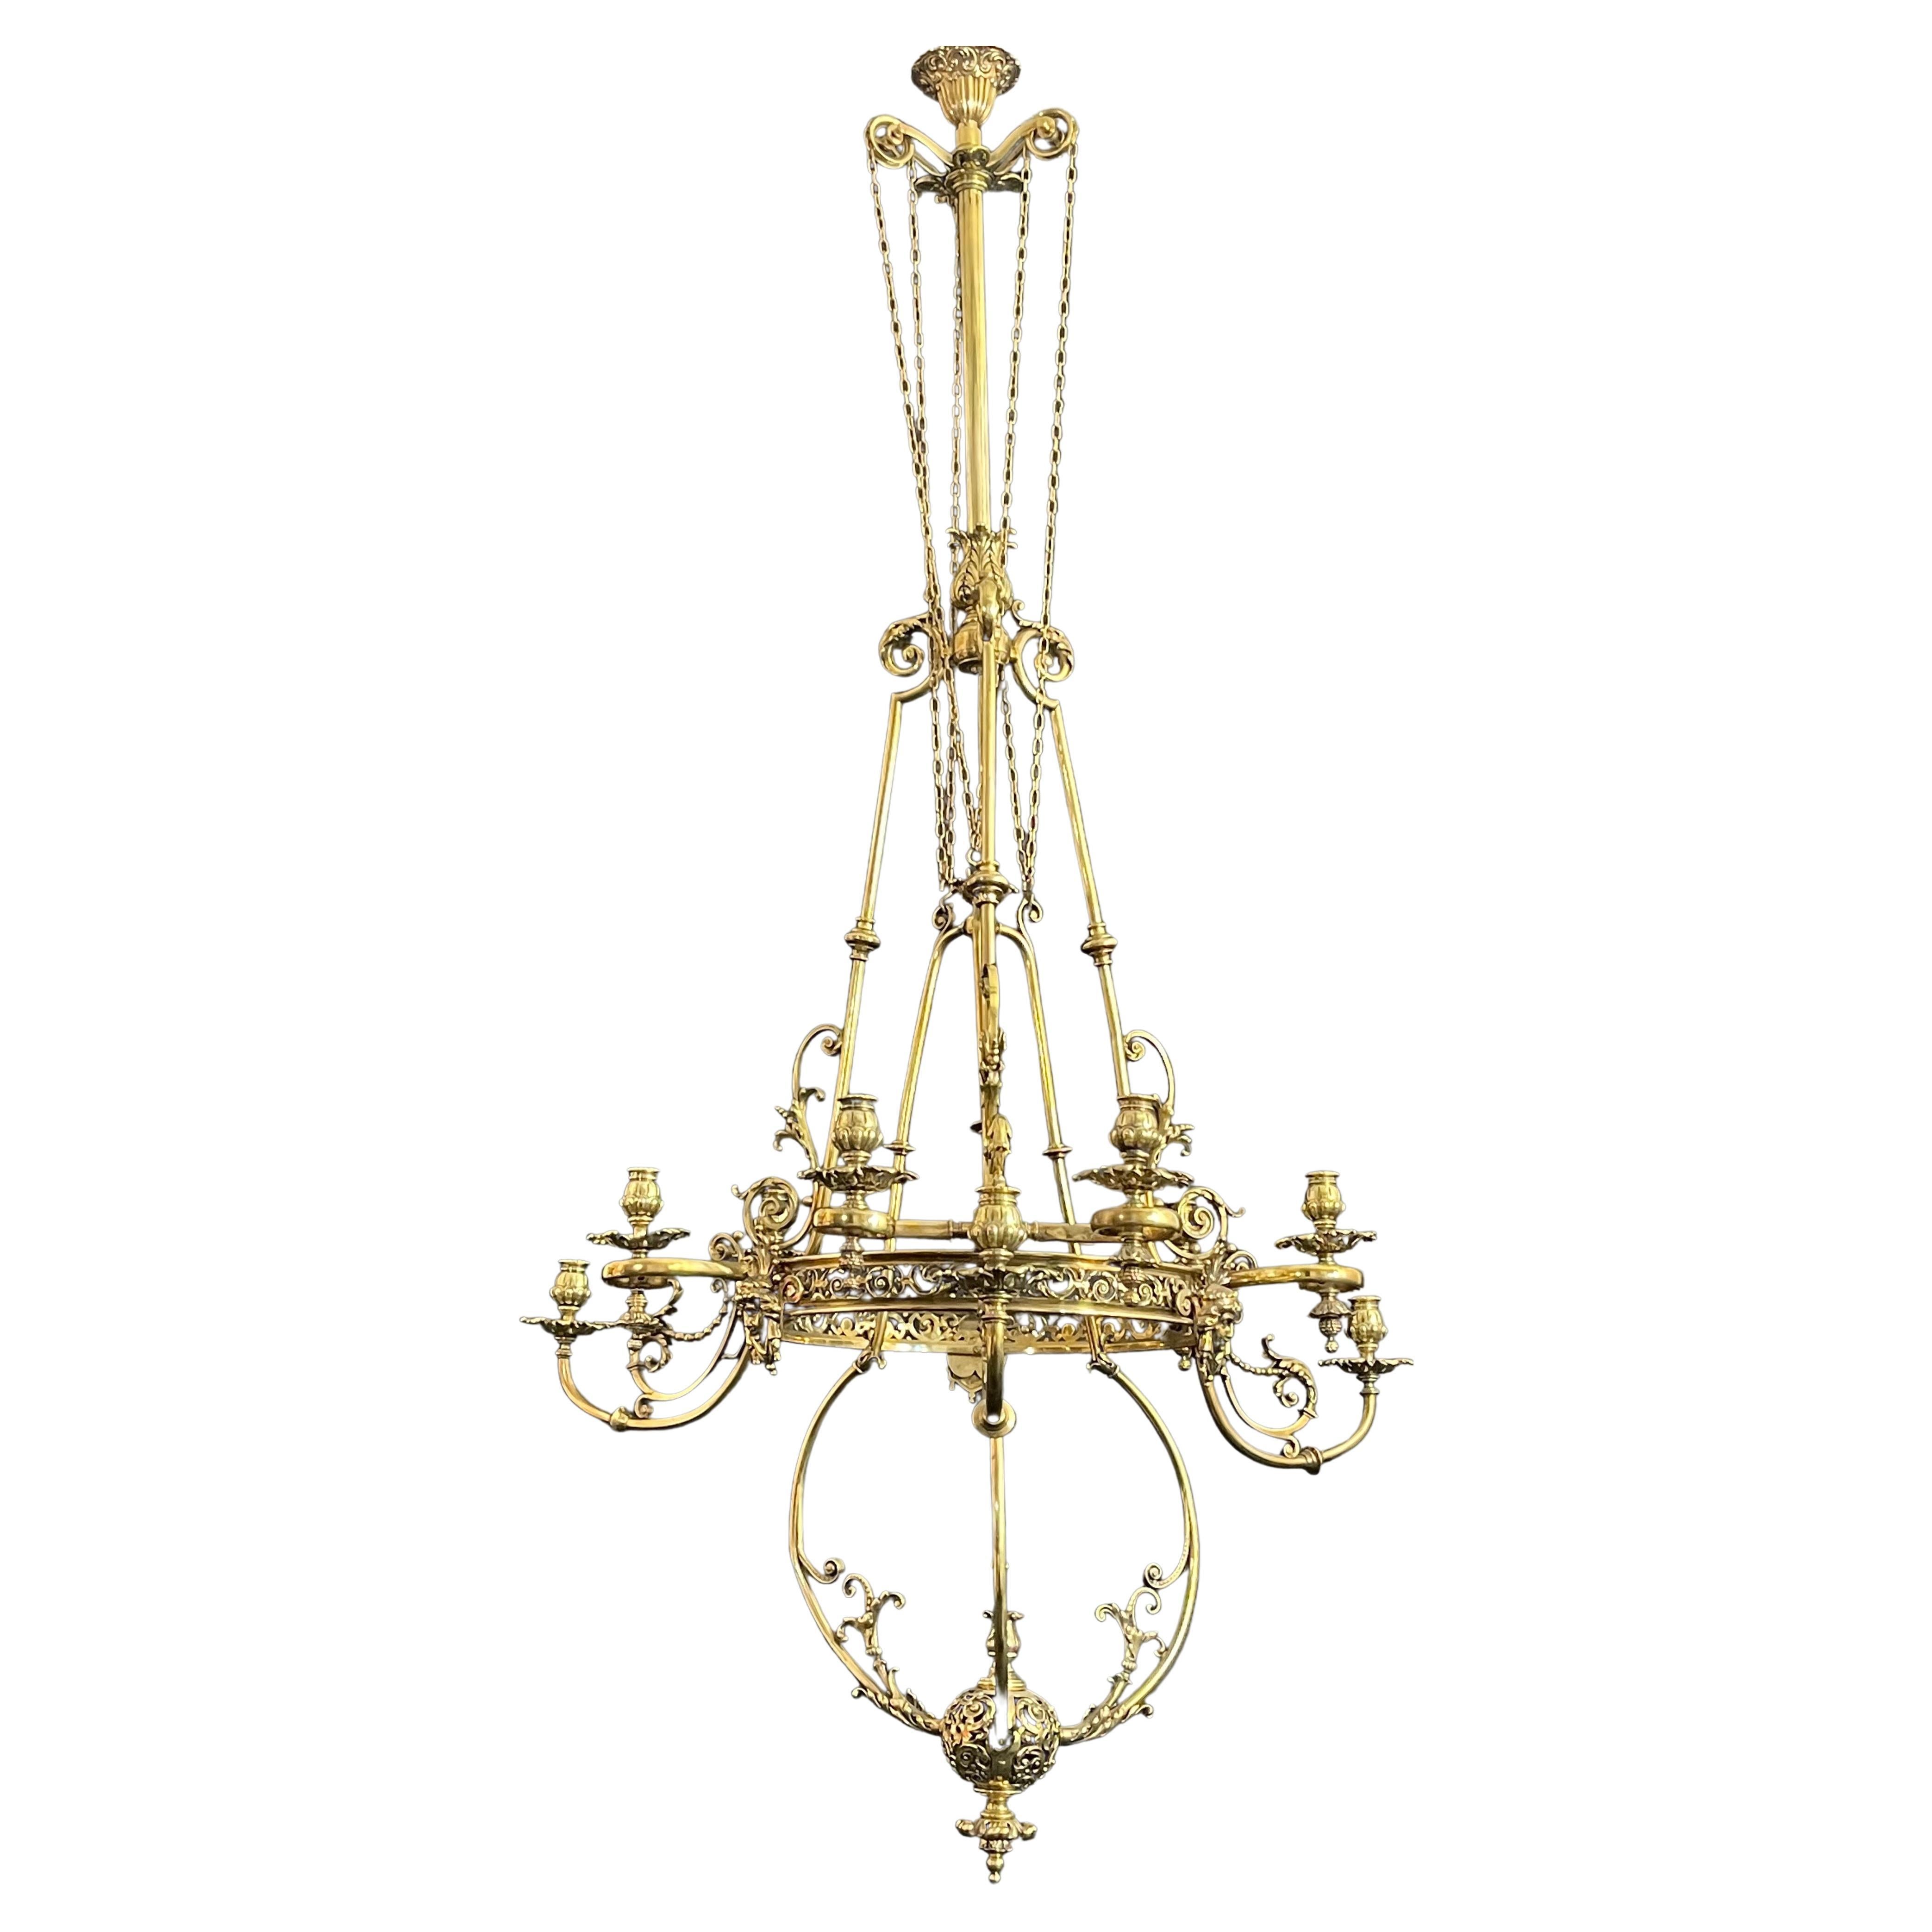 Spectacular Neoclassical Ormolu Chandelier, 18th Century For Sale